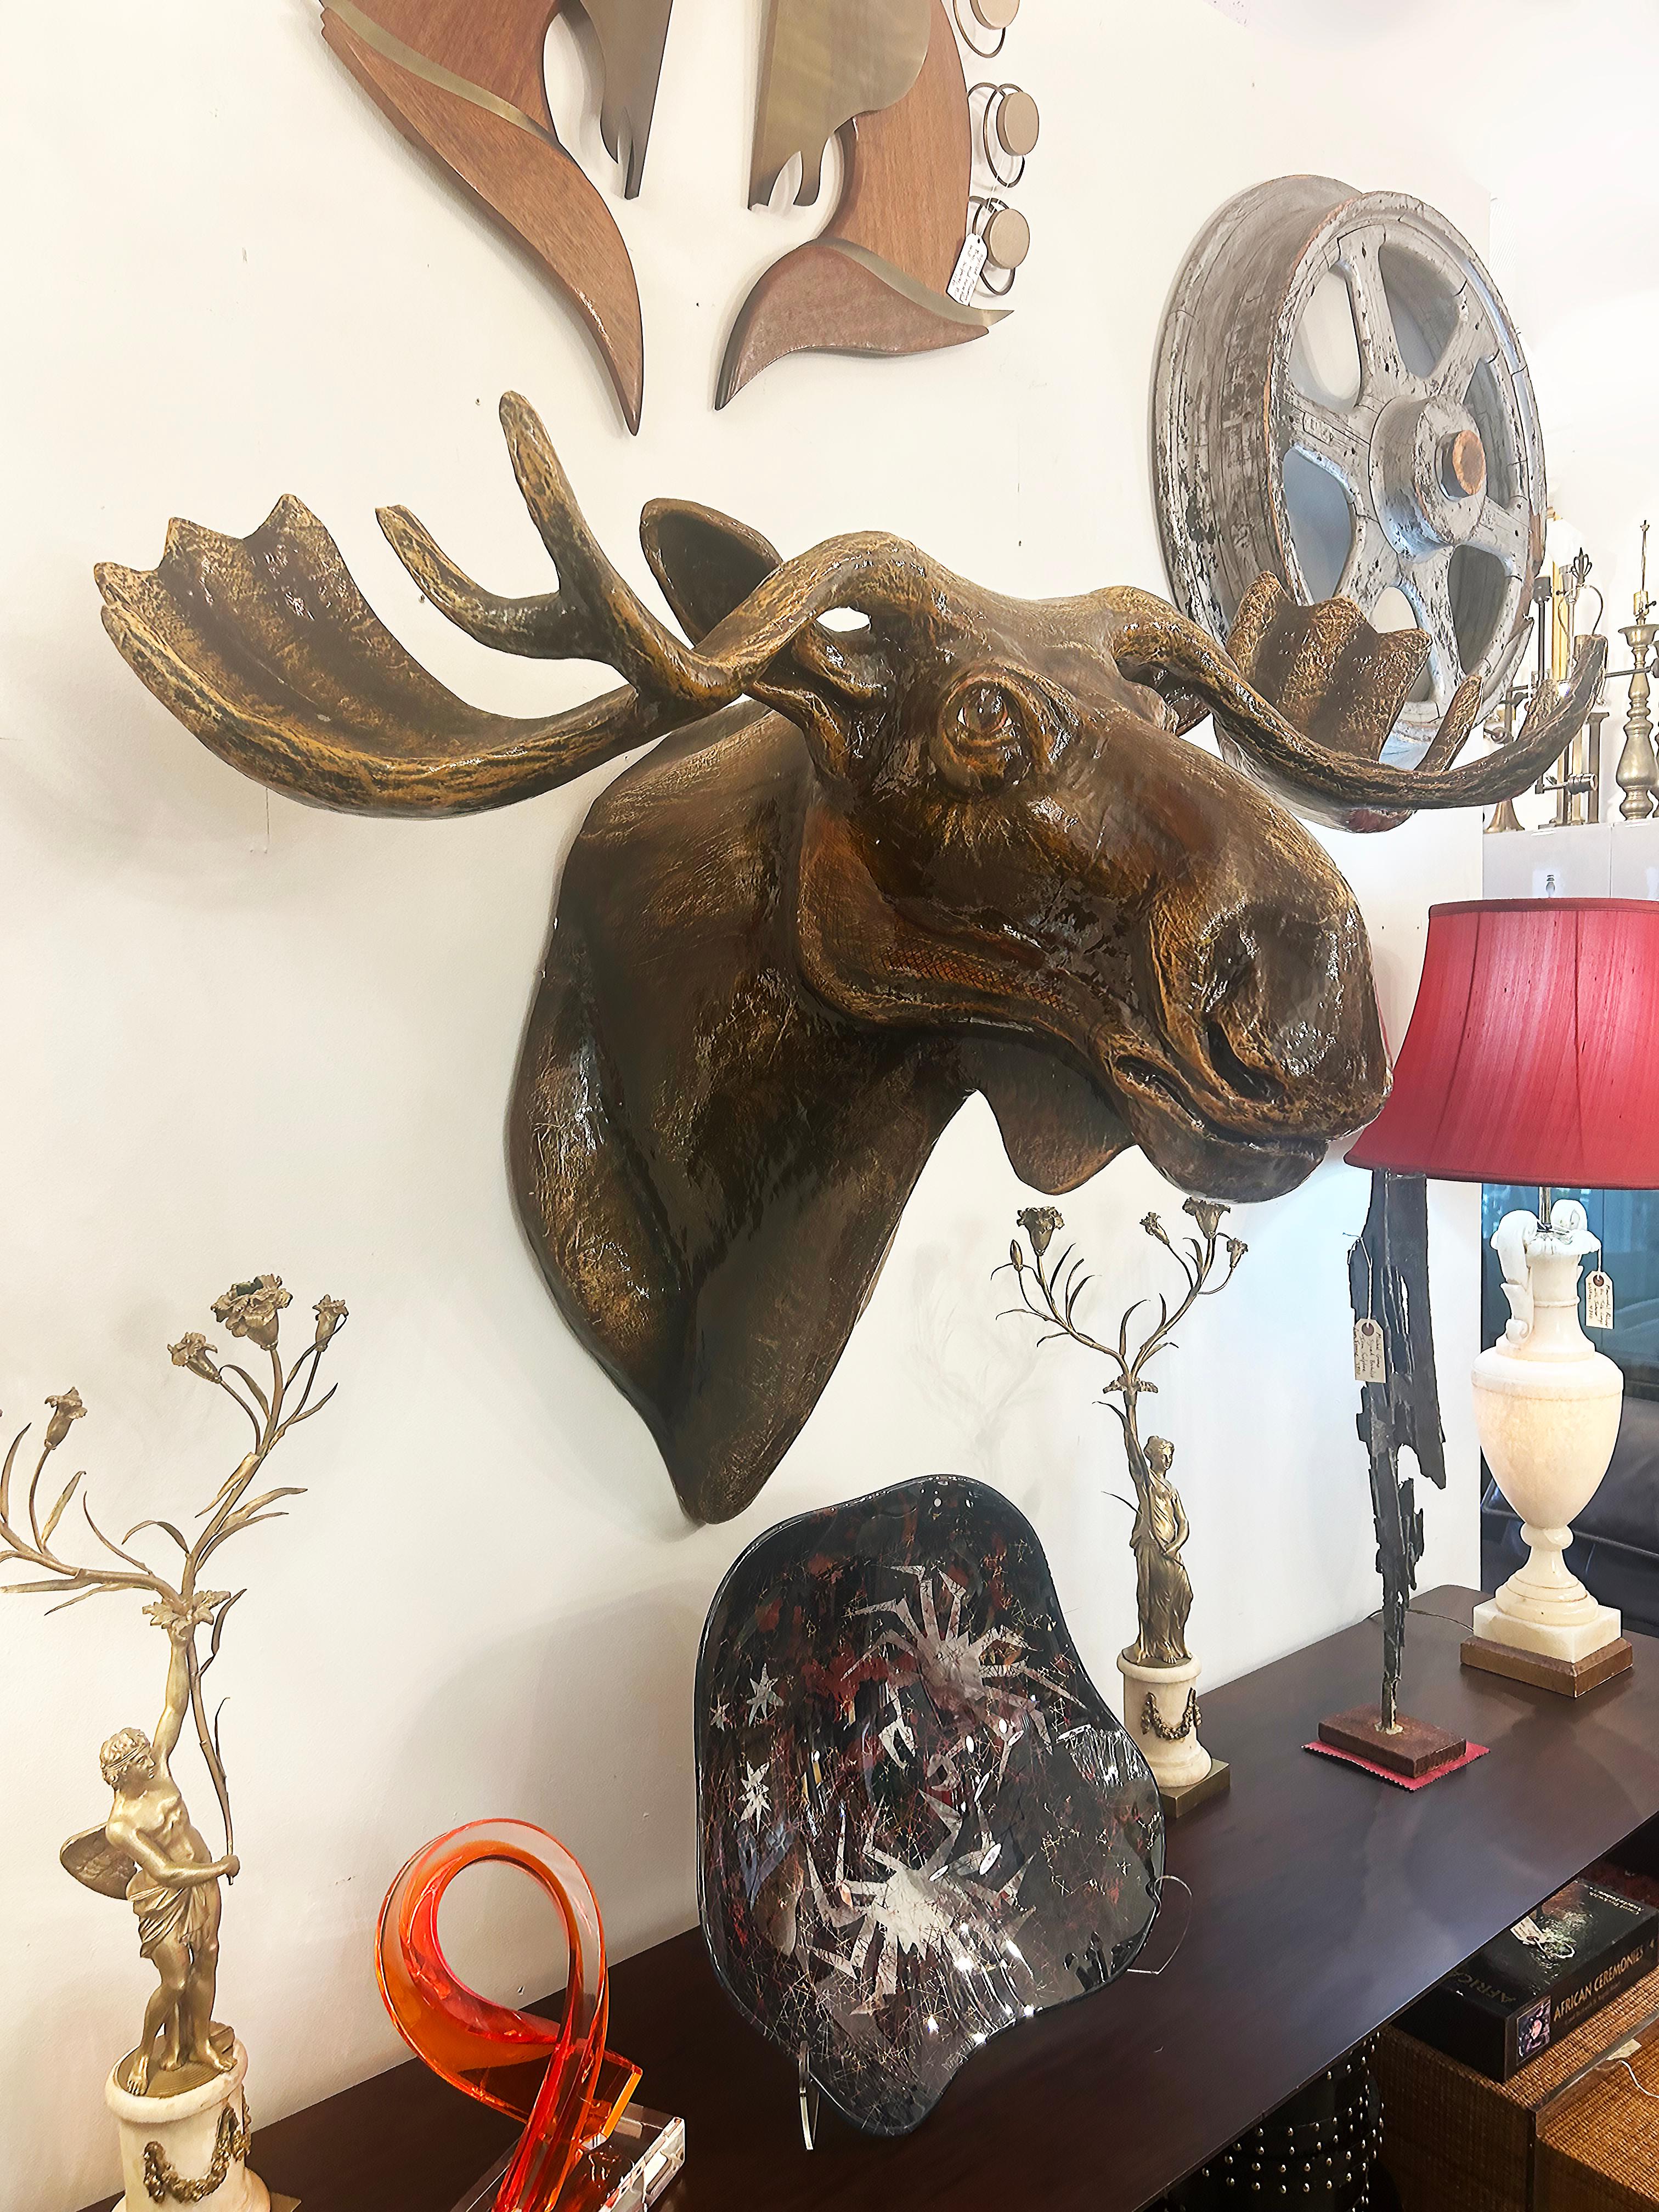 Sergio Bustamante Moose Head Wall Sculpture Limited Edition 22/100 with COA

Offered for sale is s Sergio Bustamante (Mexican b. 1949) limited edition wall-mounted moose head sculpture. The  1980s sculpture is in papier mache with chocolate paint